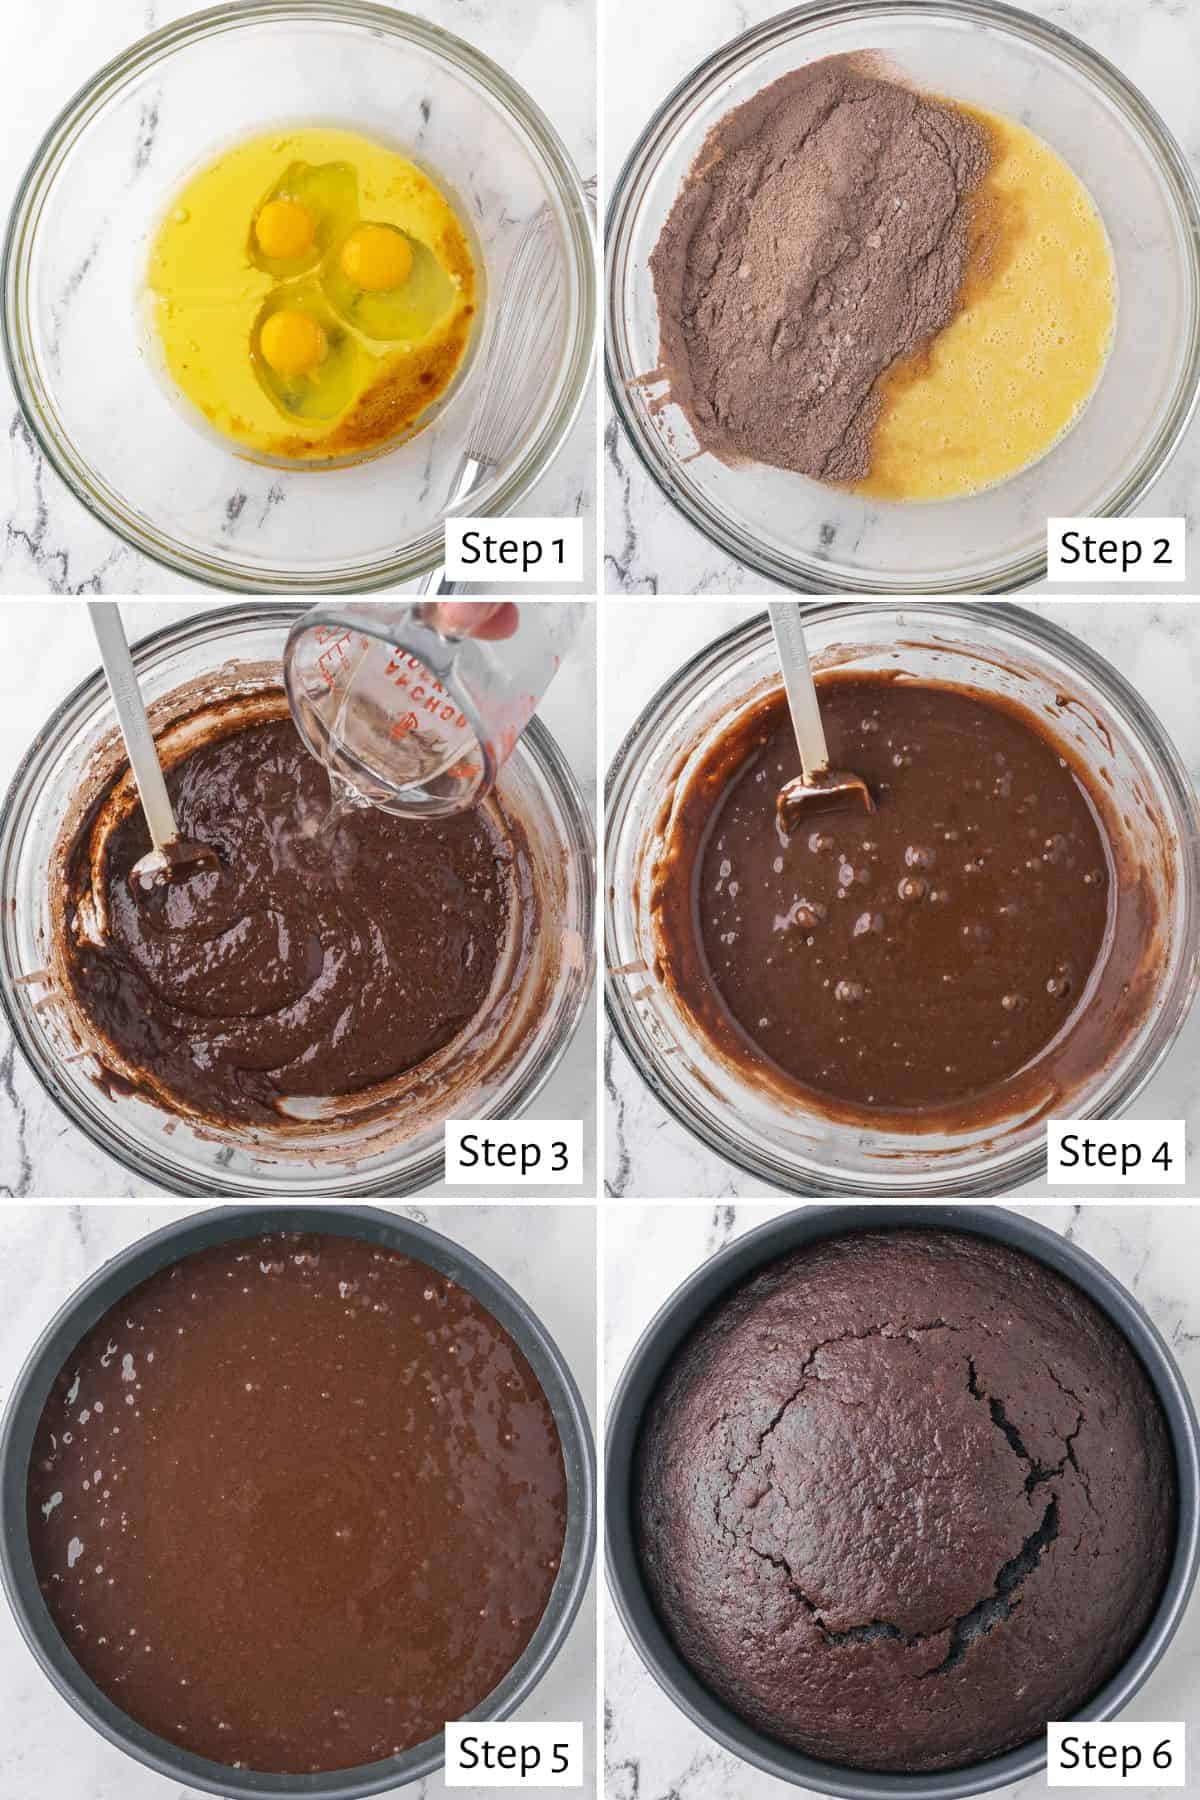 6-image collage making the recipe: 1- Oil, milk, eggs, and vanilla in a bowl before mixing; 2 - After mixing, dry ingredients added before folding; 3 - After folding, pouring hot water into mixture; 4 - Batter fully combined; 5 - Batter in prepared pan before baking; 6 - After baking.